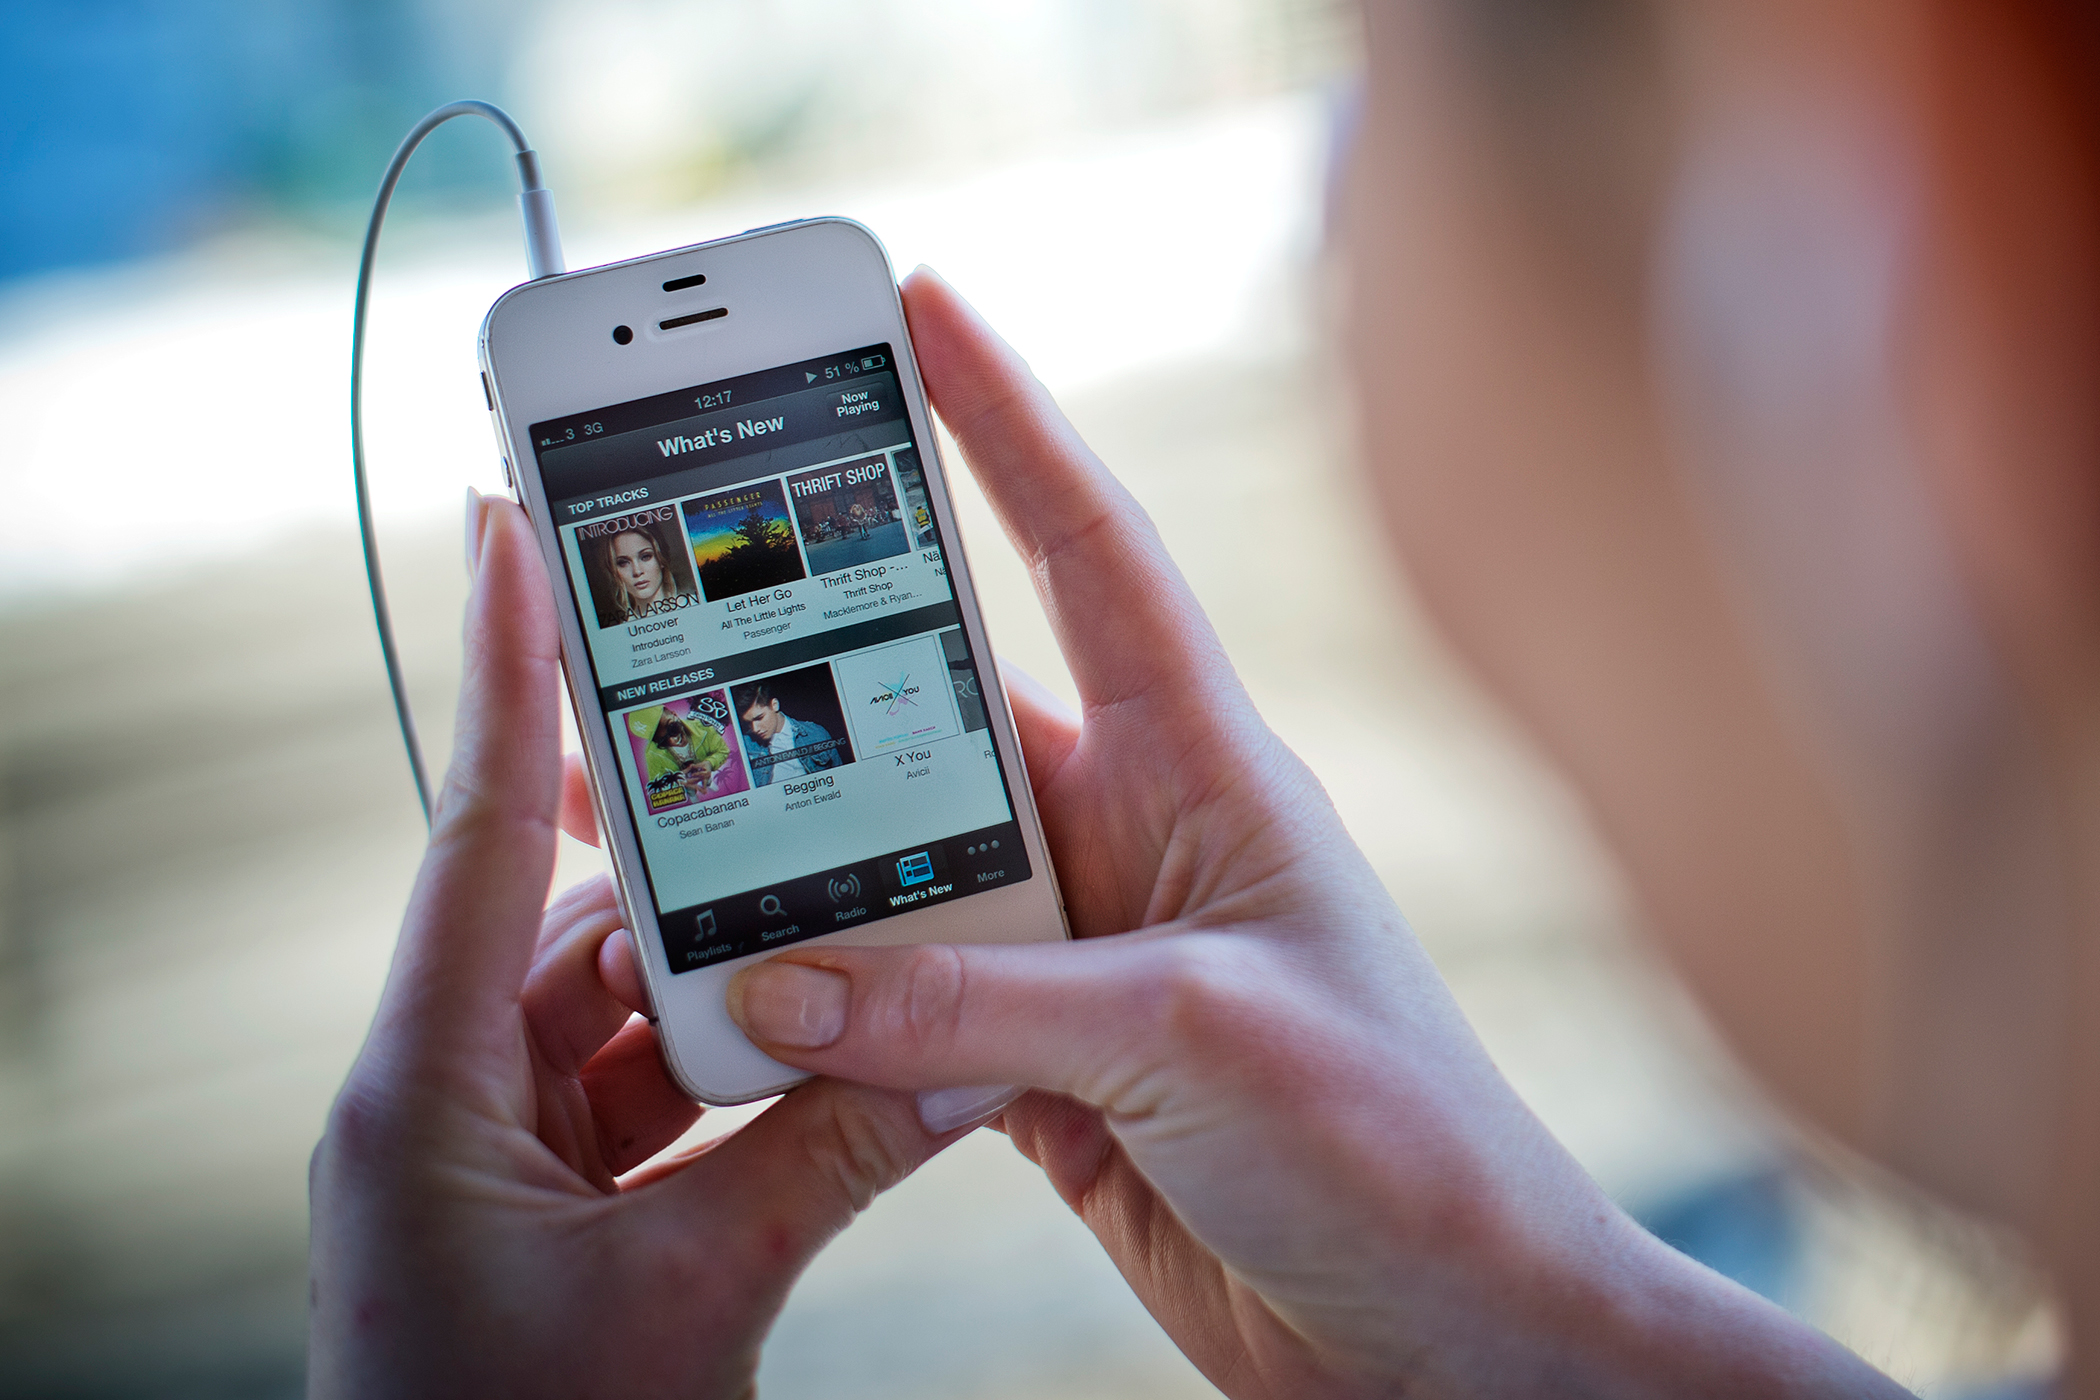 This photo shows a woman as she uses the iPhone application of Swedish music streaming service Spotify on March 7, 2013.